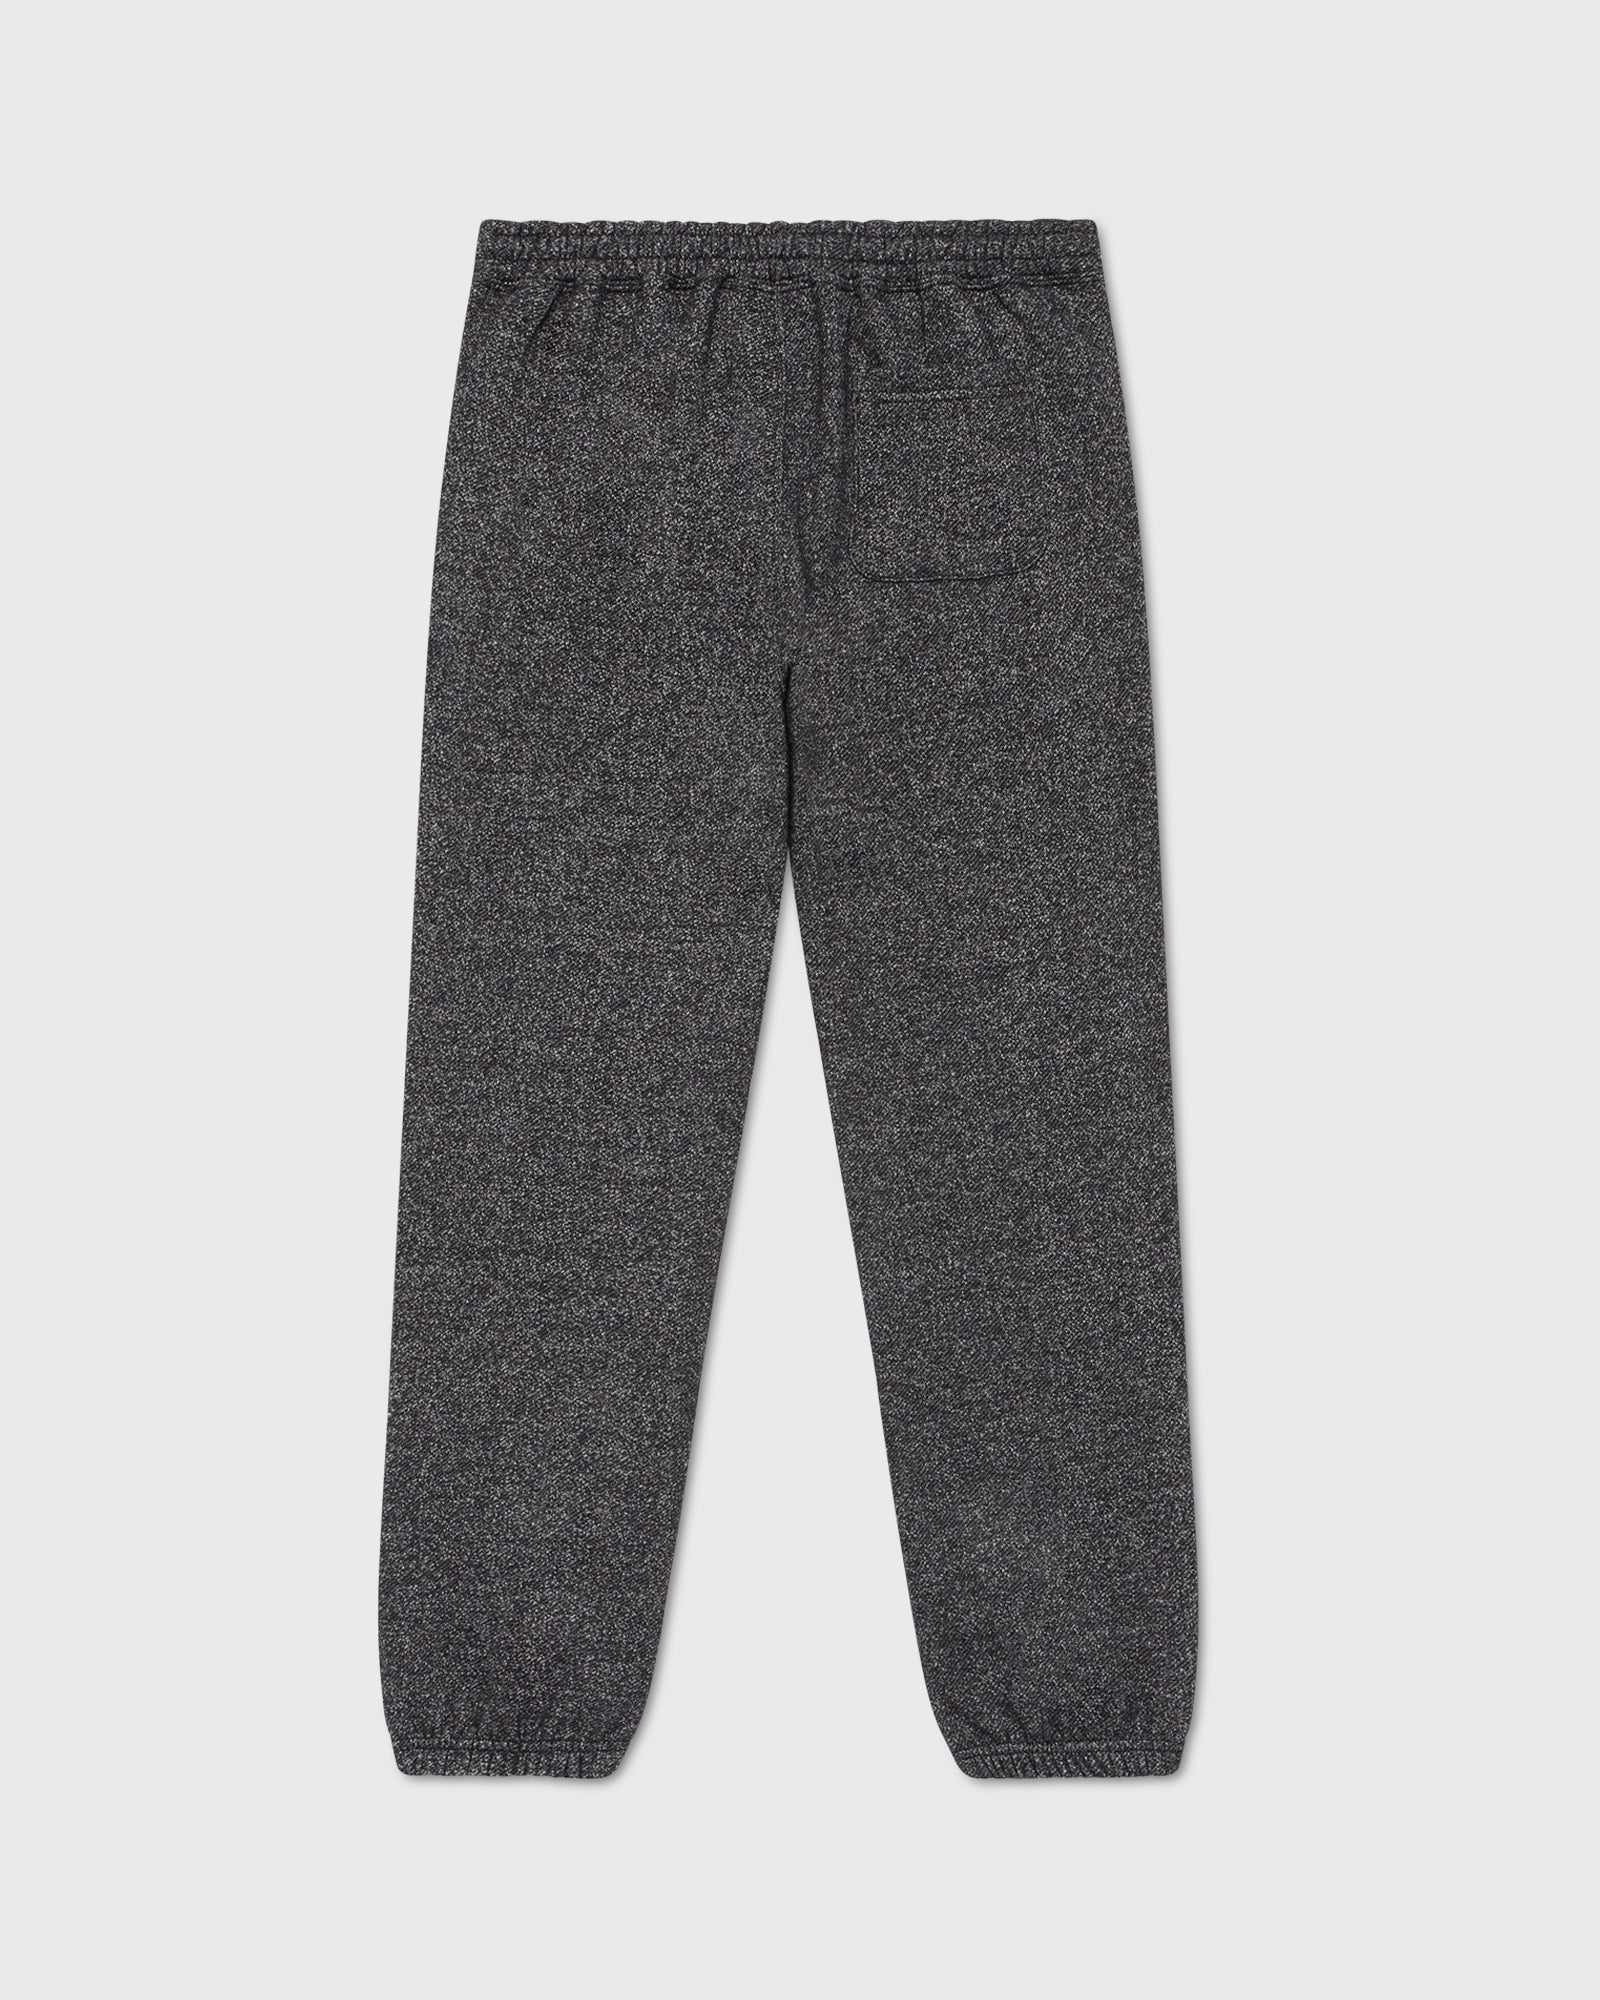 Speckle Fleece Relaxed Fit Sweatpant - Black - October's Very Own